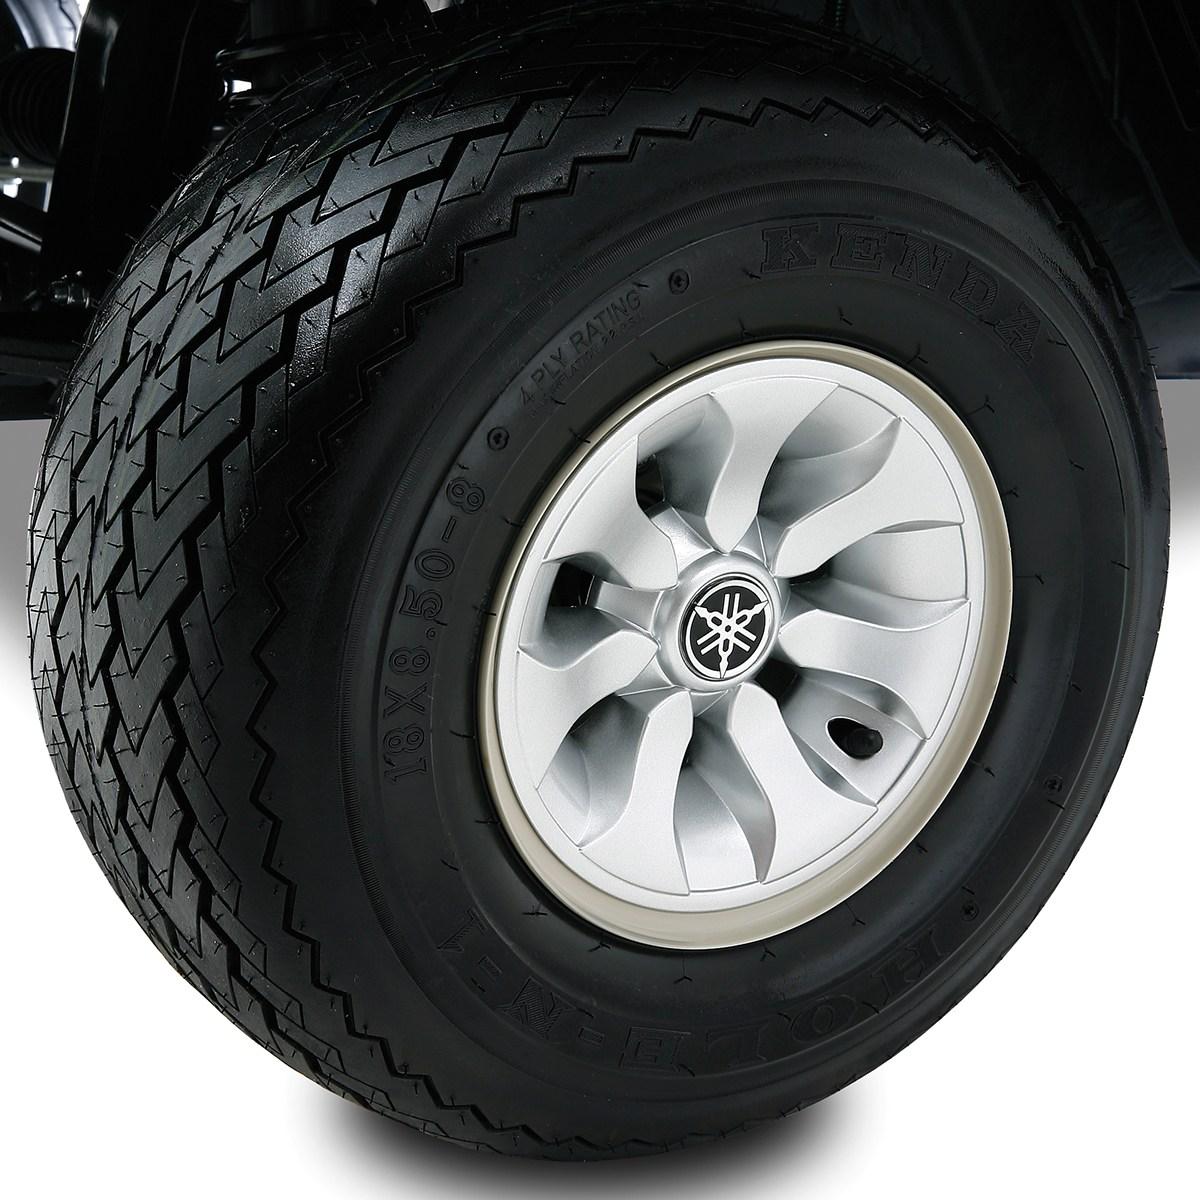 Freshen up your Golf Car's styling, while  protecting to your wheels. Our exclusive wheel covers have the Yamaha's iconic appearance and will fit ant stock 8" wheel.